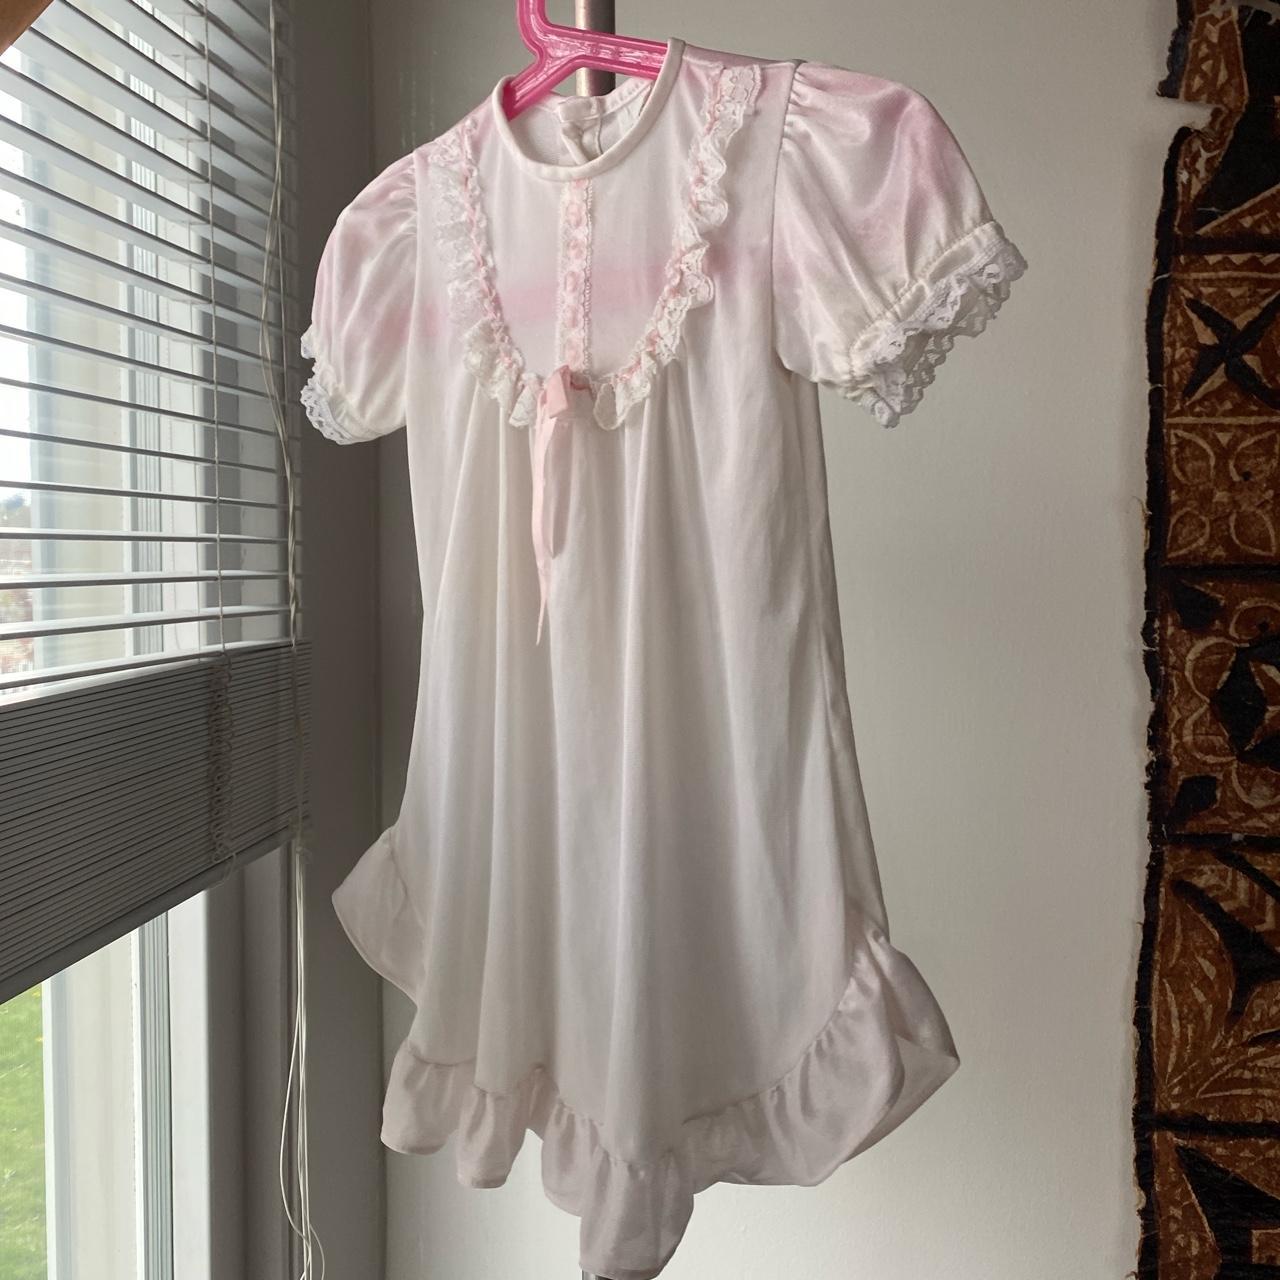 Cute lil girls nightgown - nylon and vintage! Size... - Depop